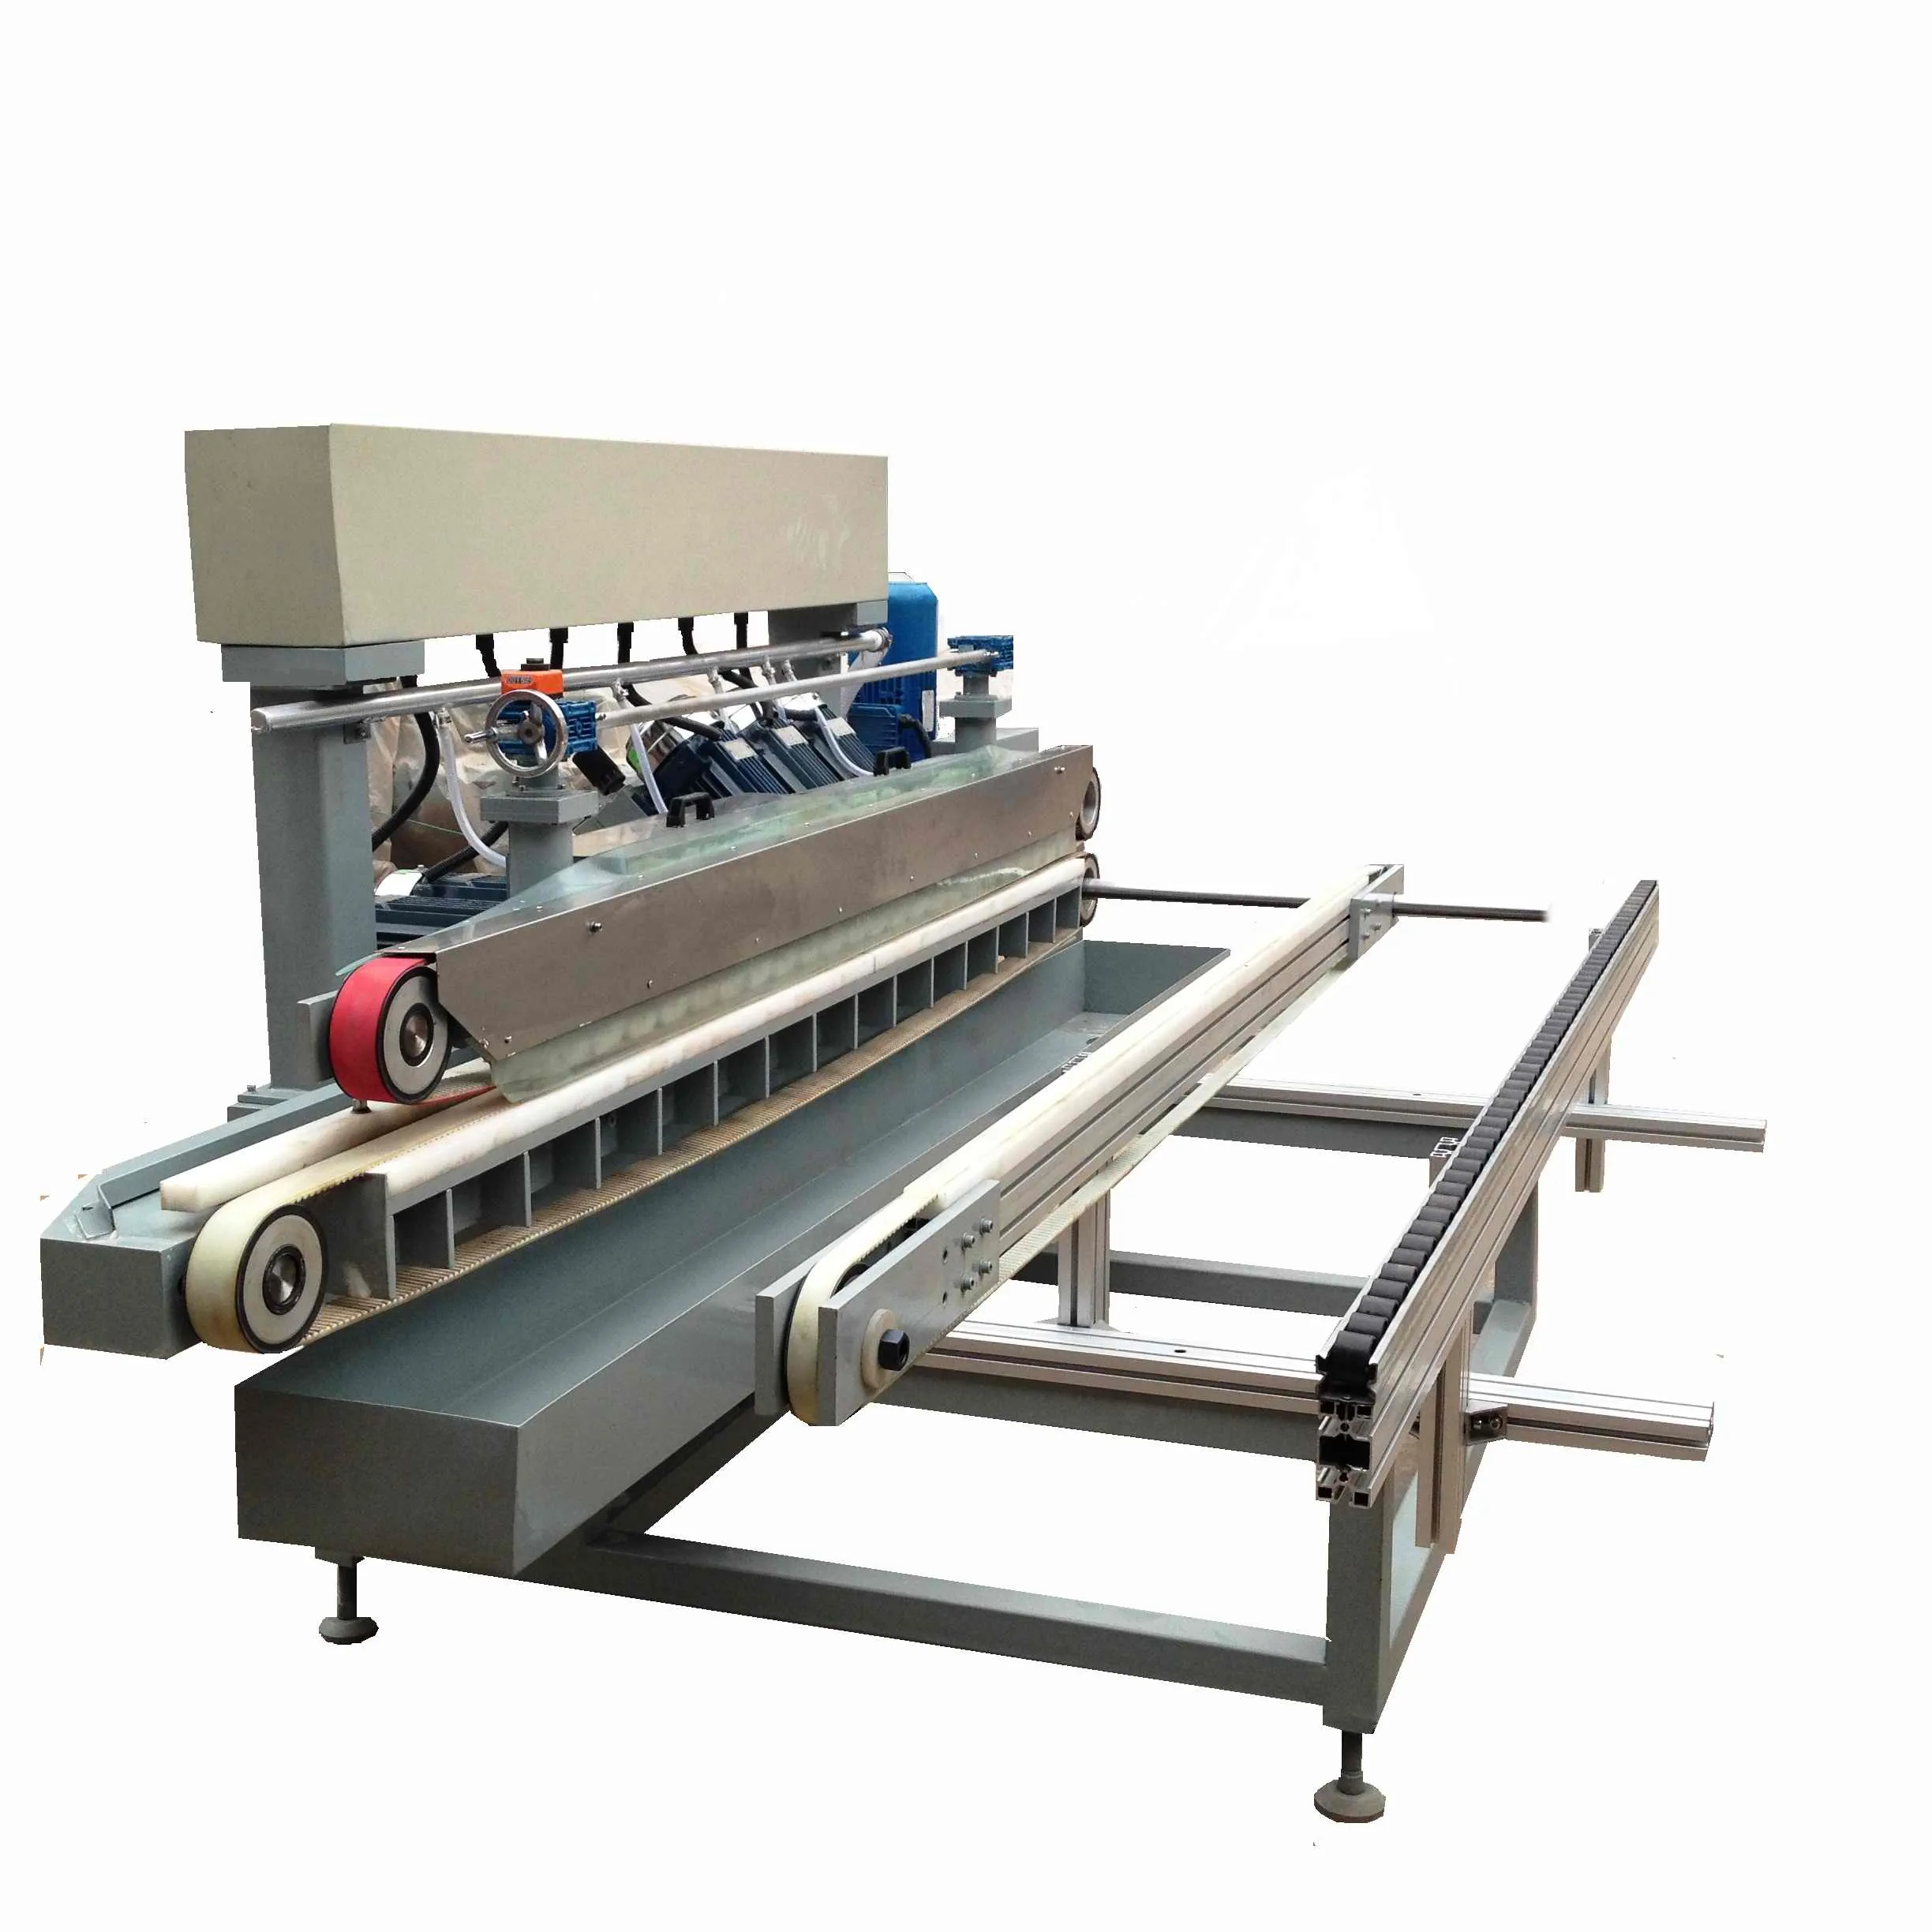 Ruilong Automatical CNC Glass Edge Grinding Machine with drilling milling grinding polishing function